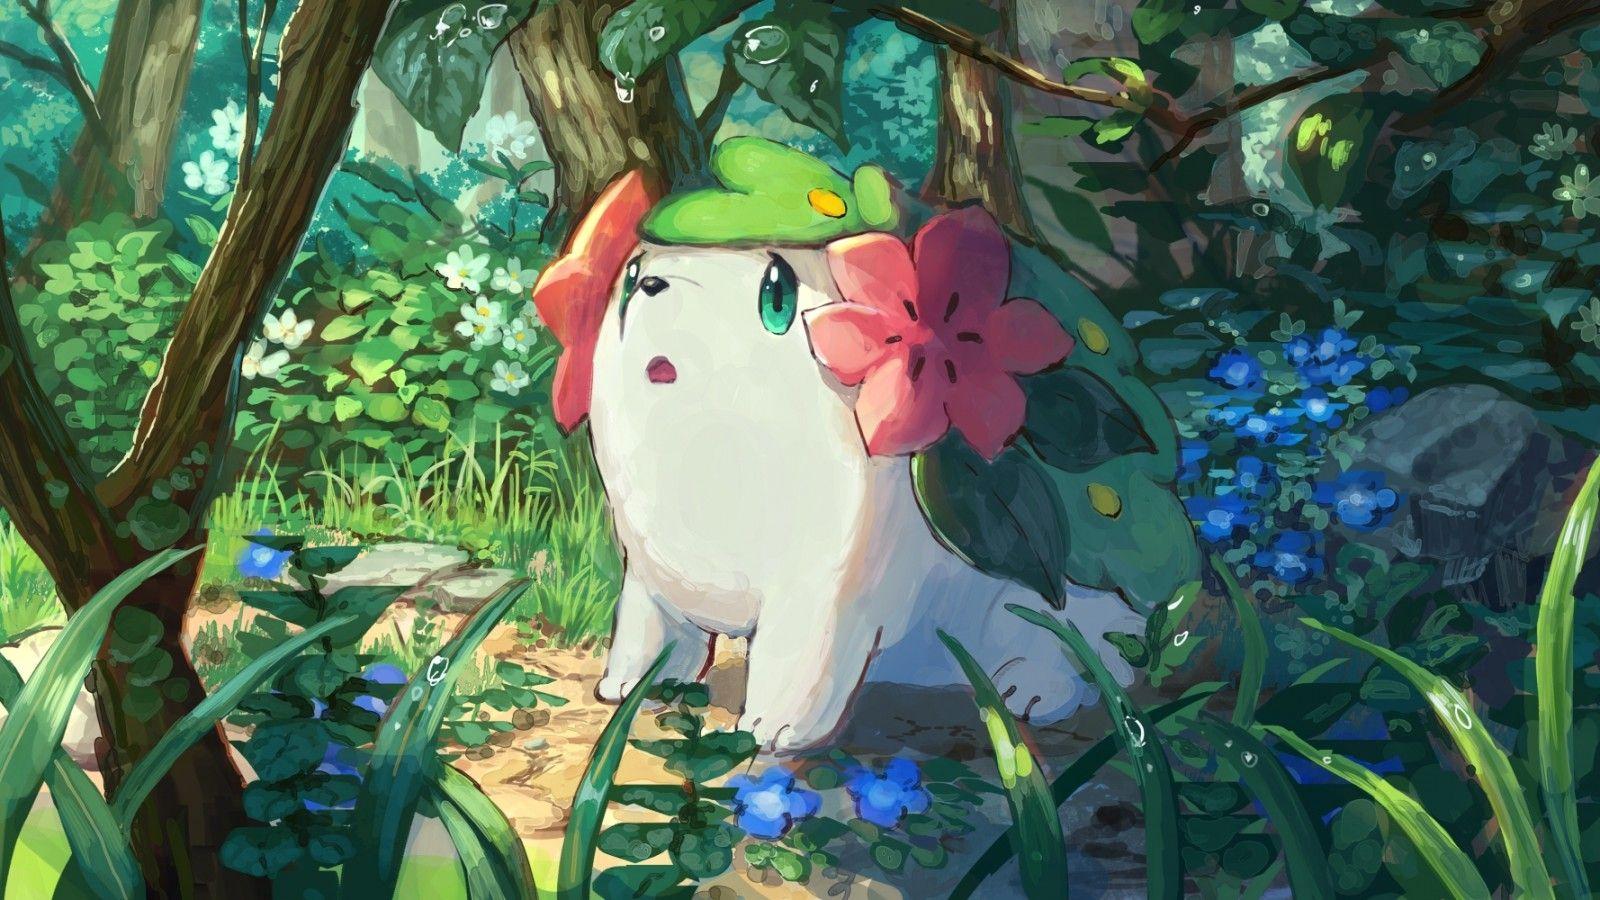 Download 1600x900 Pokemon Shaymin, Cute, Forest, Bubbles Wallpapers.